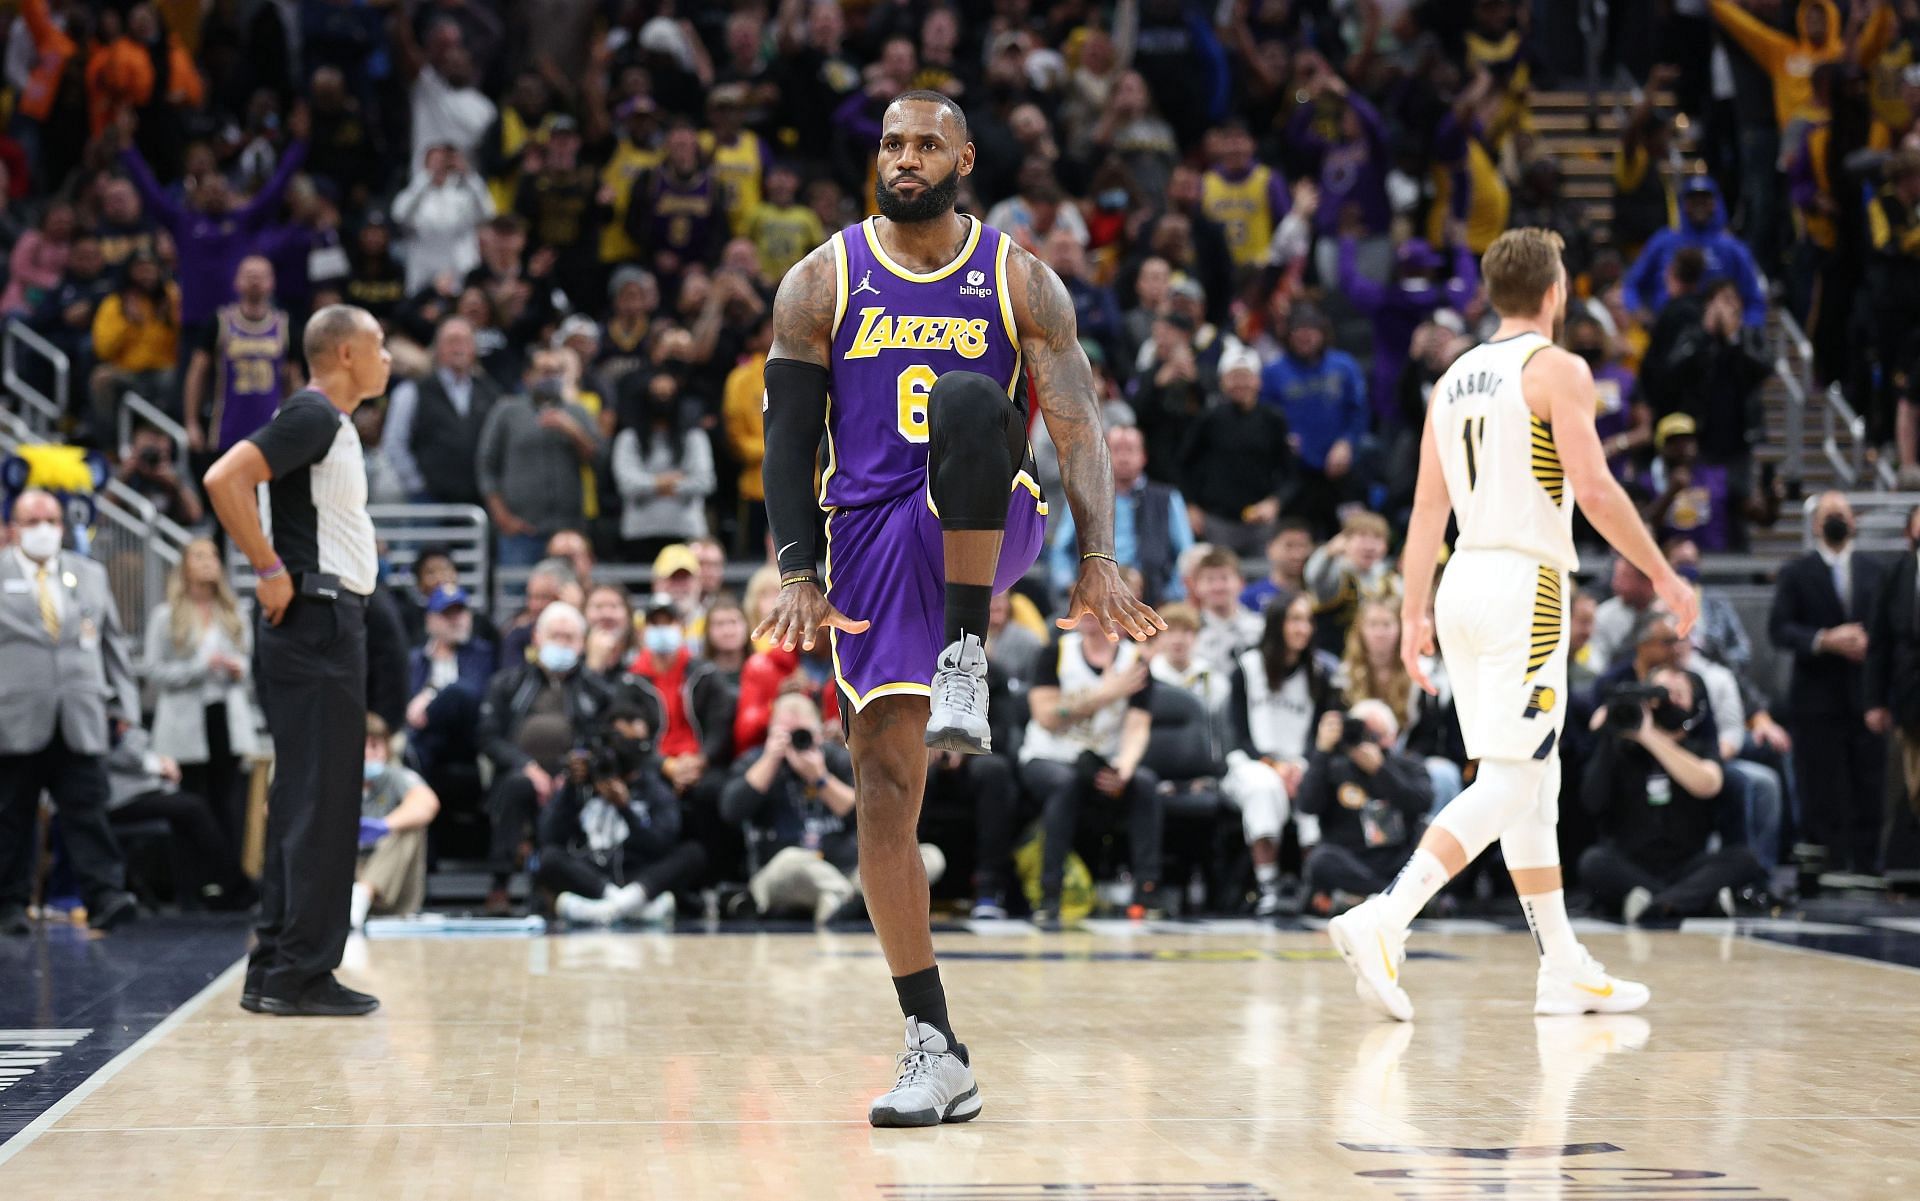 LeBron James of the Los Angeles Lakers celebrates in a 124-116 overtime win against the Indiana Pacers at Gainbridge Fieldhouse on Nov. 24, 2021, in Indianapolis, Indiana.